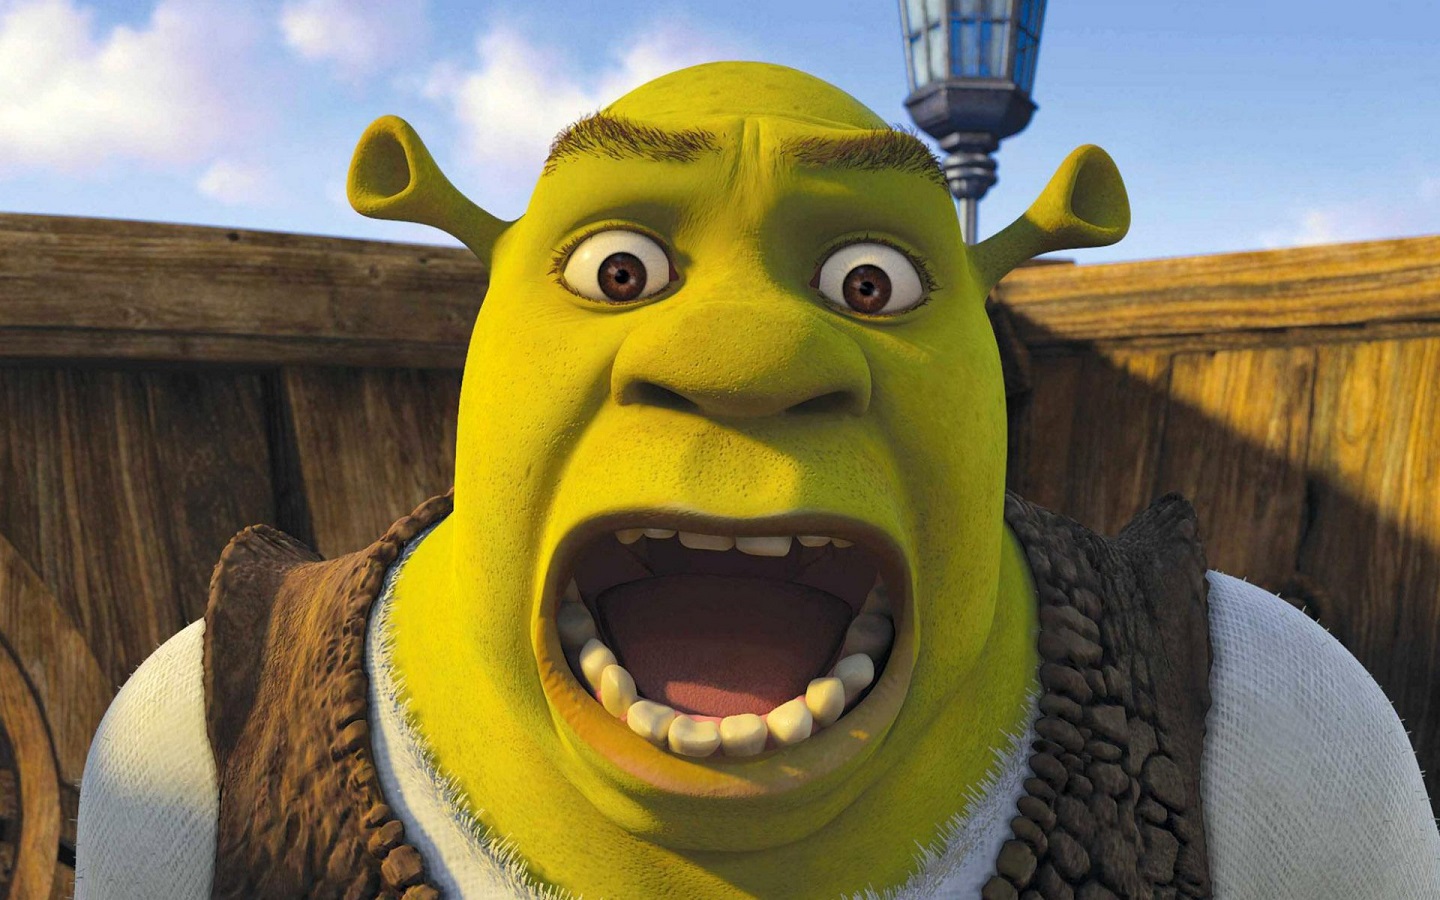 General 1440x900 Shrek movies animated movies Dreamworks screaming frontal view portrait